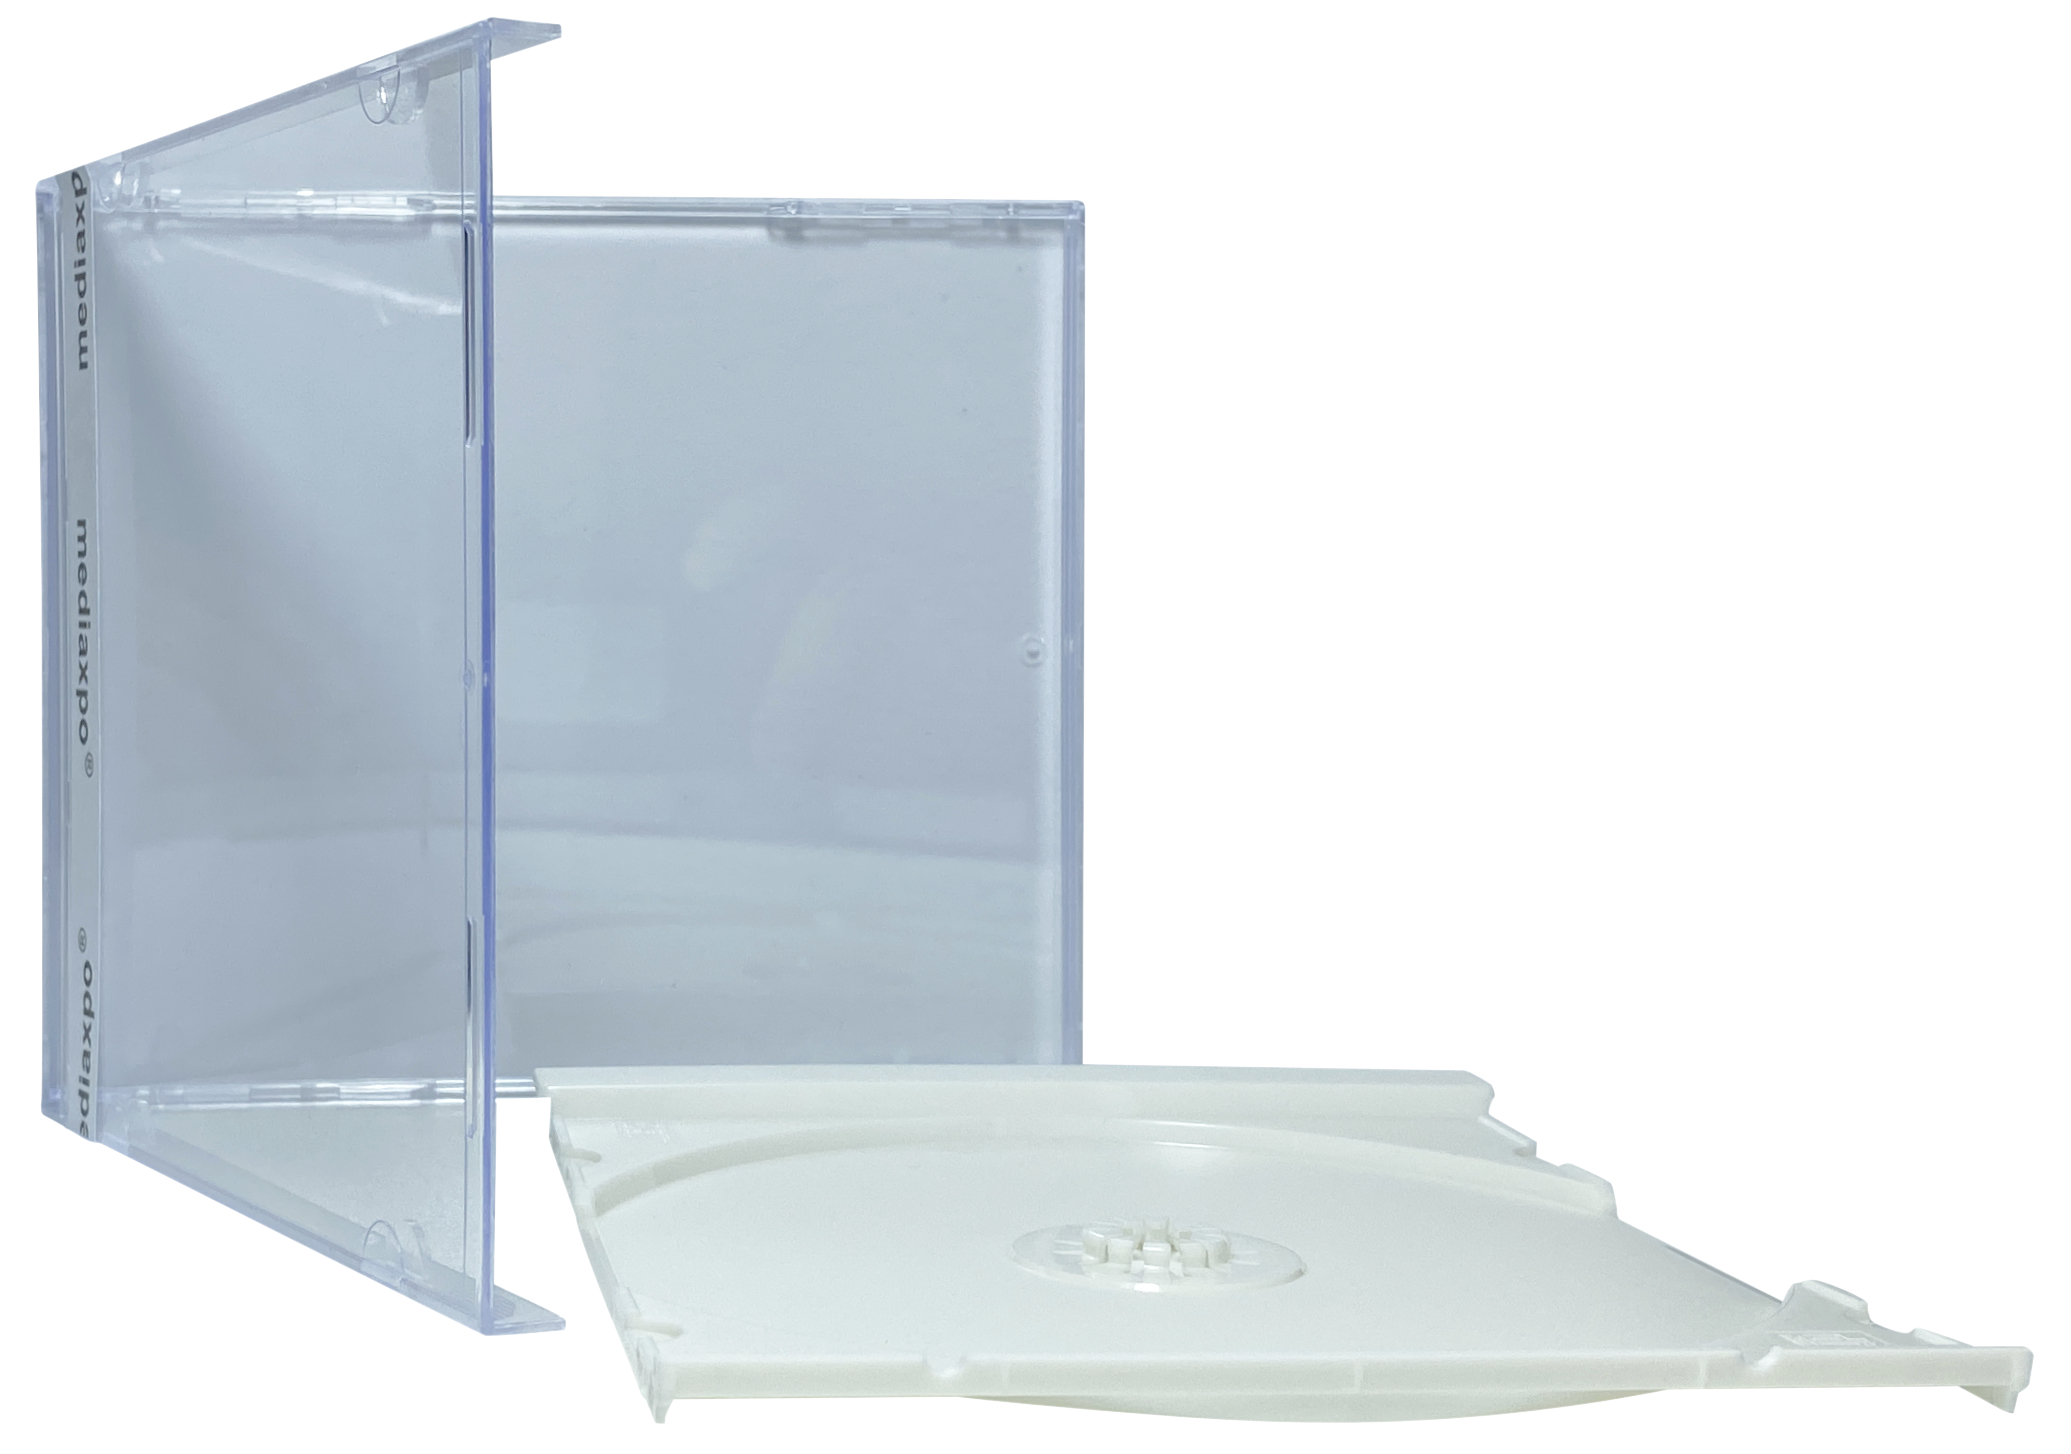 Image of ID 1214262408 100 STANDARD White Color CD Jewel Case (Unassembled)